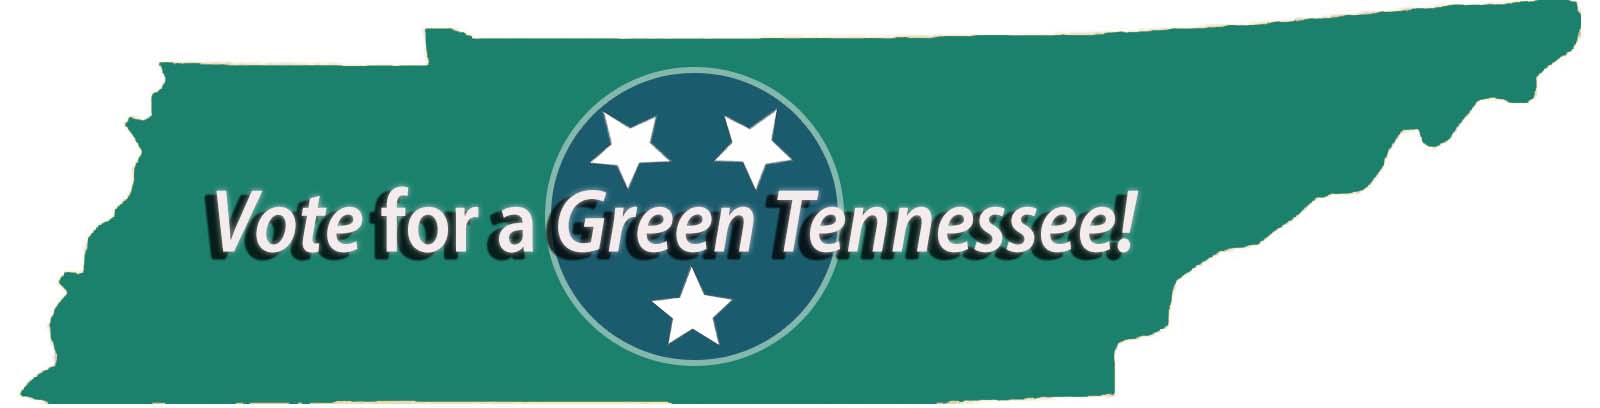 Green Tennessee map with three stars and caption Vote for a Green Tennessee